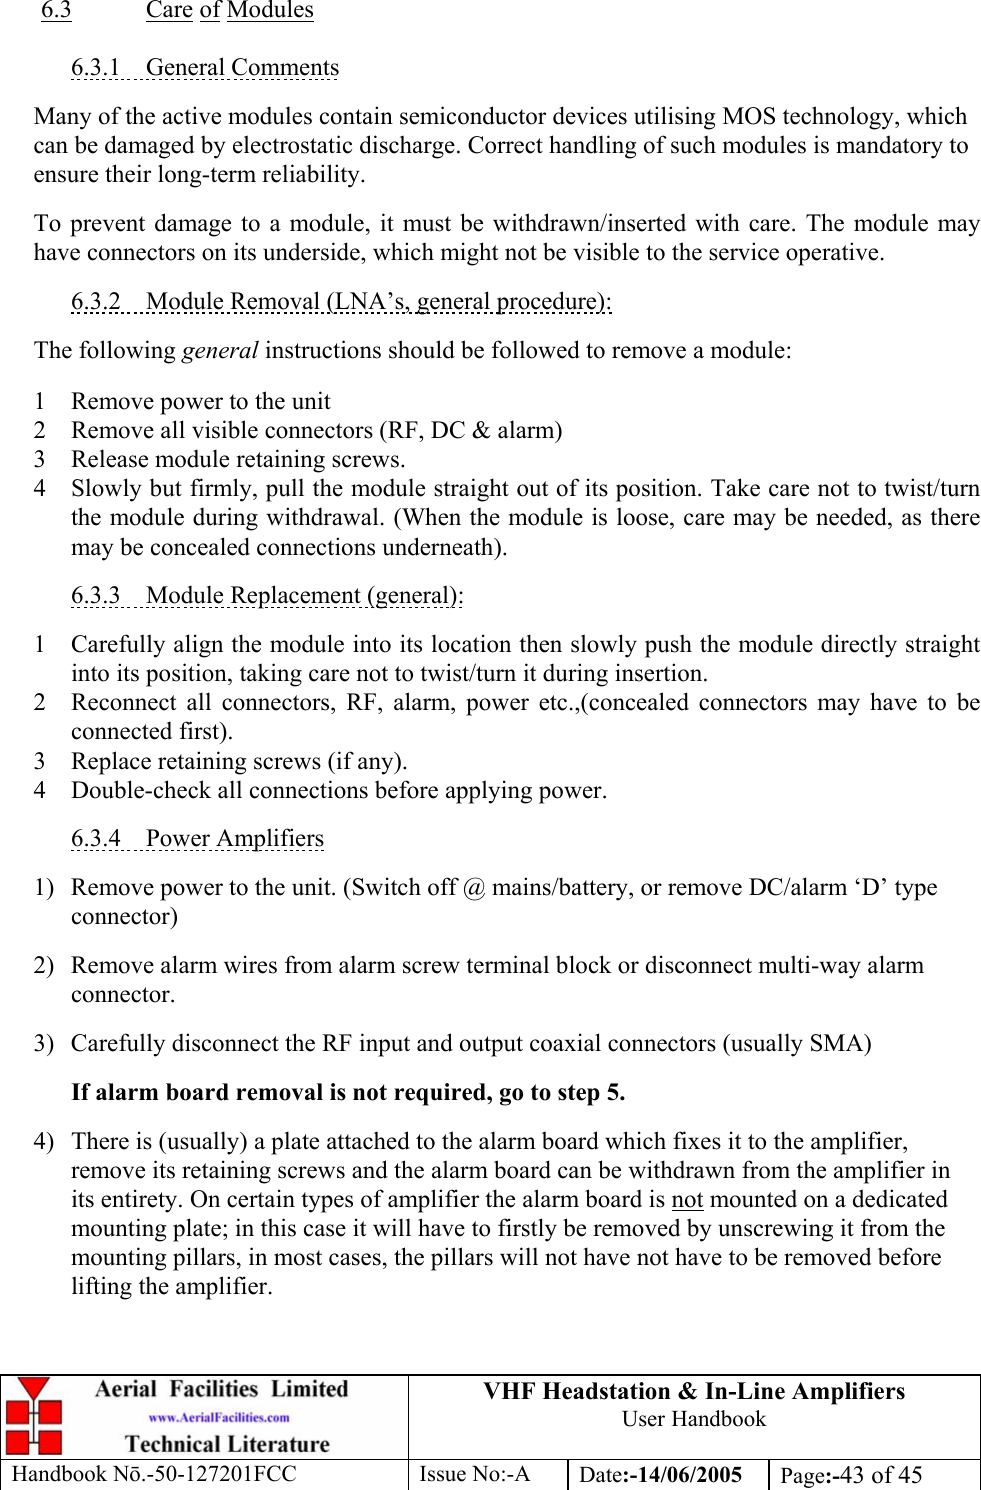 VHF Headstation &amp; In-Line Amplifiers User Handbook Handbook Nō.-50-127201FCC Issue No:-A Date:-14/06/2005  Page:-43 of 45   6.3 Care of Modules  6.3.1 General Comments  Many of the active modules contain semiconductor devices utilising MOS technology, which can be damaged by electrostatic discharge. Correct handling of such modules is mandatory to ensure their long-term reliability.  To prevent damage to a module, it must be withdrawn/inserted with care. The module may have connectors on its underside, which might not be visible to the service operative.  6.3.2  Module Removal (LNA’s, general procedure):  The following general instructions should be followed to remove a module:  1  Remove power to the unit 2  Remove all visible connectors (RF, DC &amp; alarm) 3  Release module retaining screws. 4  Slowly but firmly, pull the module straight out of its position. Take care not to twist/turn the module during withdrawal. (When the module is loose, care may be needed, as there may be concealed connections underneath).  6.3.3  Module Replacement (general):  1  Carefully align the module into its location then slowly push the module directly straight into its position, taking care not to twist/turn it during insertion. 2  Reconnect all connectors, RF, alarm, power etc.,(concealed connectors may have to be connected first). 3  Replace retaining screws (if any). 4  Double-check all connections before applying power.  6.3.4 Power Amplifiers  1)  Remove power to the unit. (Switch off @ mains/battery, or remove DC/alarm ‘D’ type connector)  2)  Remove alarm wires from alarm screw terminal block or disconnect multi-way alarm connector.  3)  Carefully disconnect the RF input and output coaxial connectors (usually SMA)  If alarm board removal is not required, go to step 5.  4)  There is (usually) a plate attached to the alarm board which fixes it to the amplifier, remove its retaining screws and the alarm board can be withdrawn from the amplifier in its entirety. On certain types of amplifier the alarm board is not mounted on a dedicated mounting plate; in this case it will have to firstly be removed by unscrewing it from the mounting pillars, in most cases, the pillars will not have not have to be removed before lifting the amplifier. 